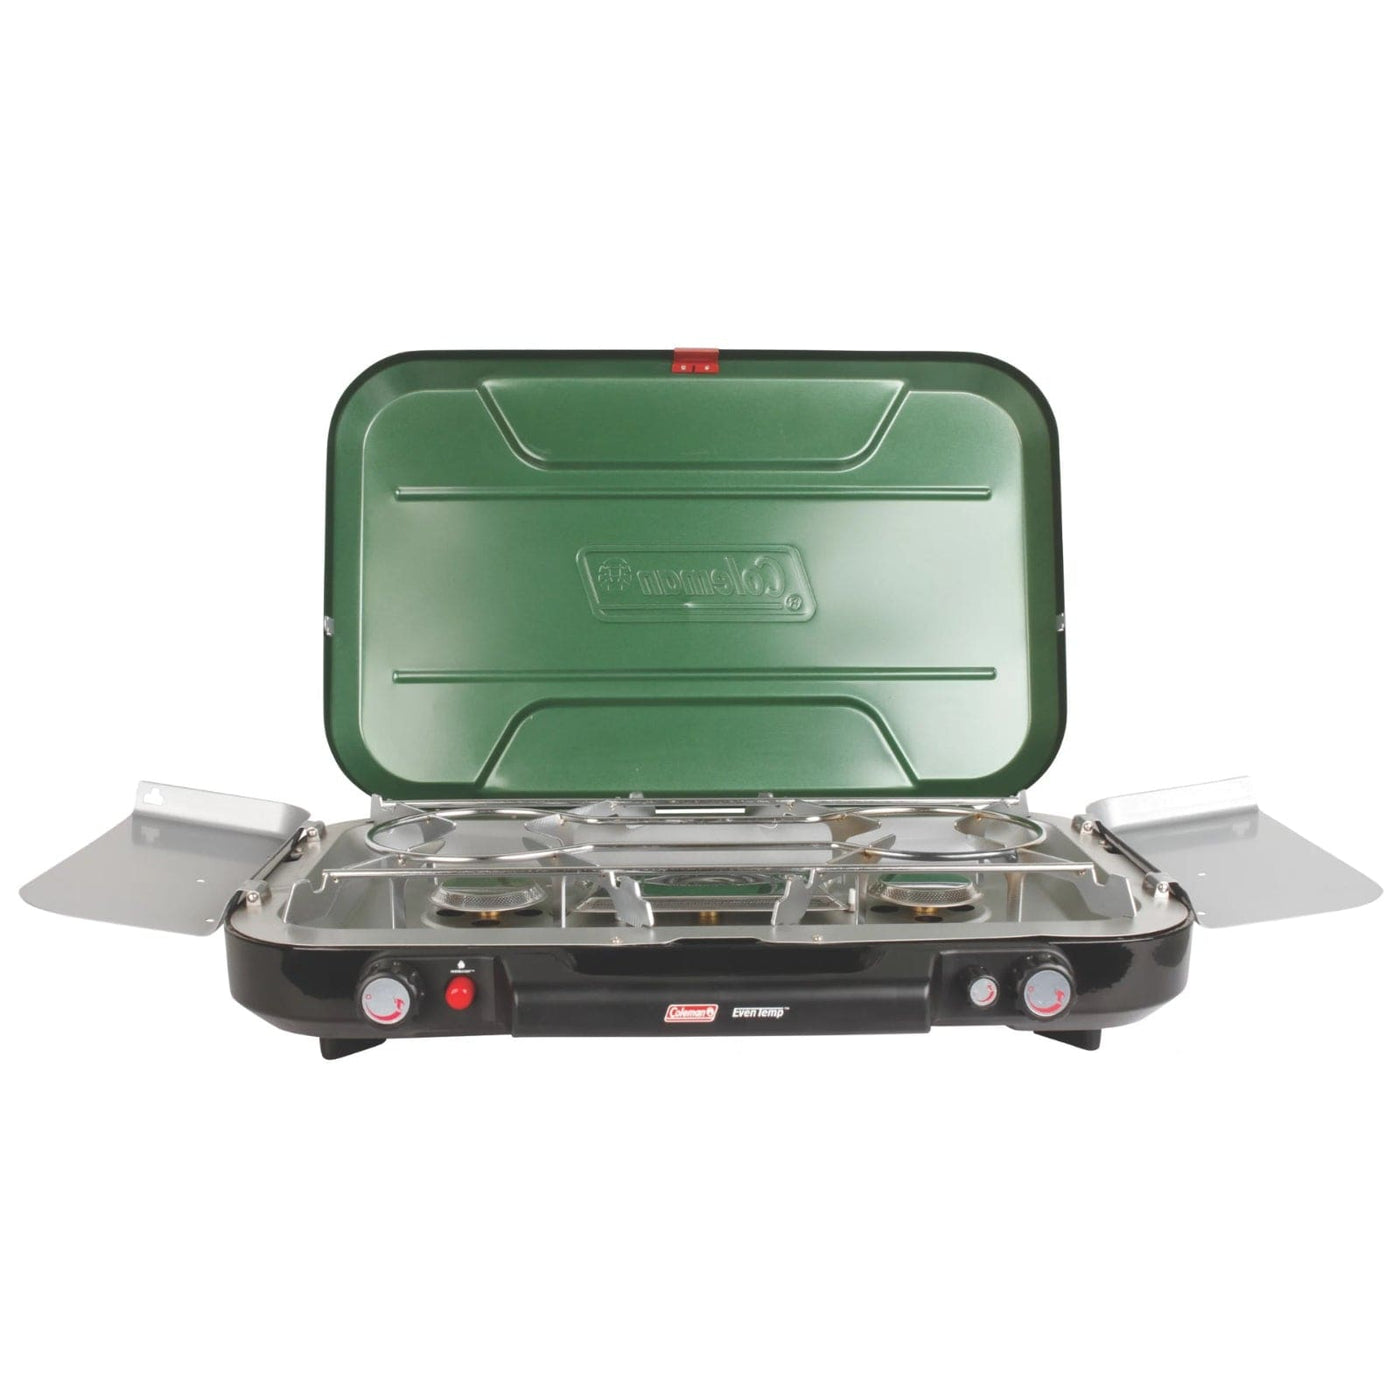 Coleman Coleman Eventemp 3 Burner Propane Stove Black Camping And Outdoor